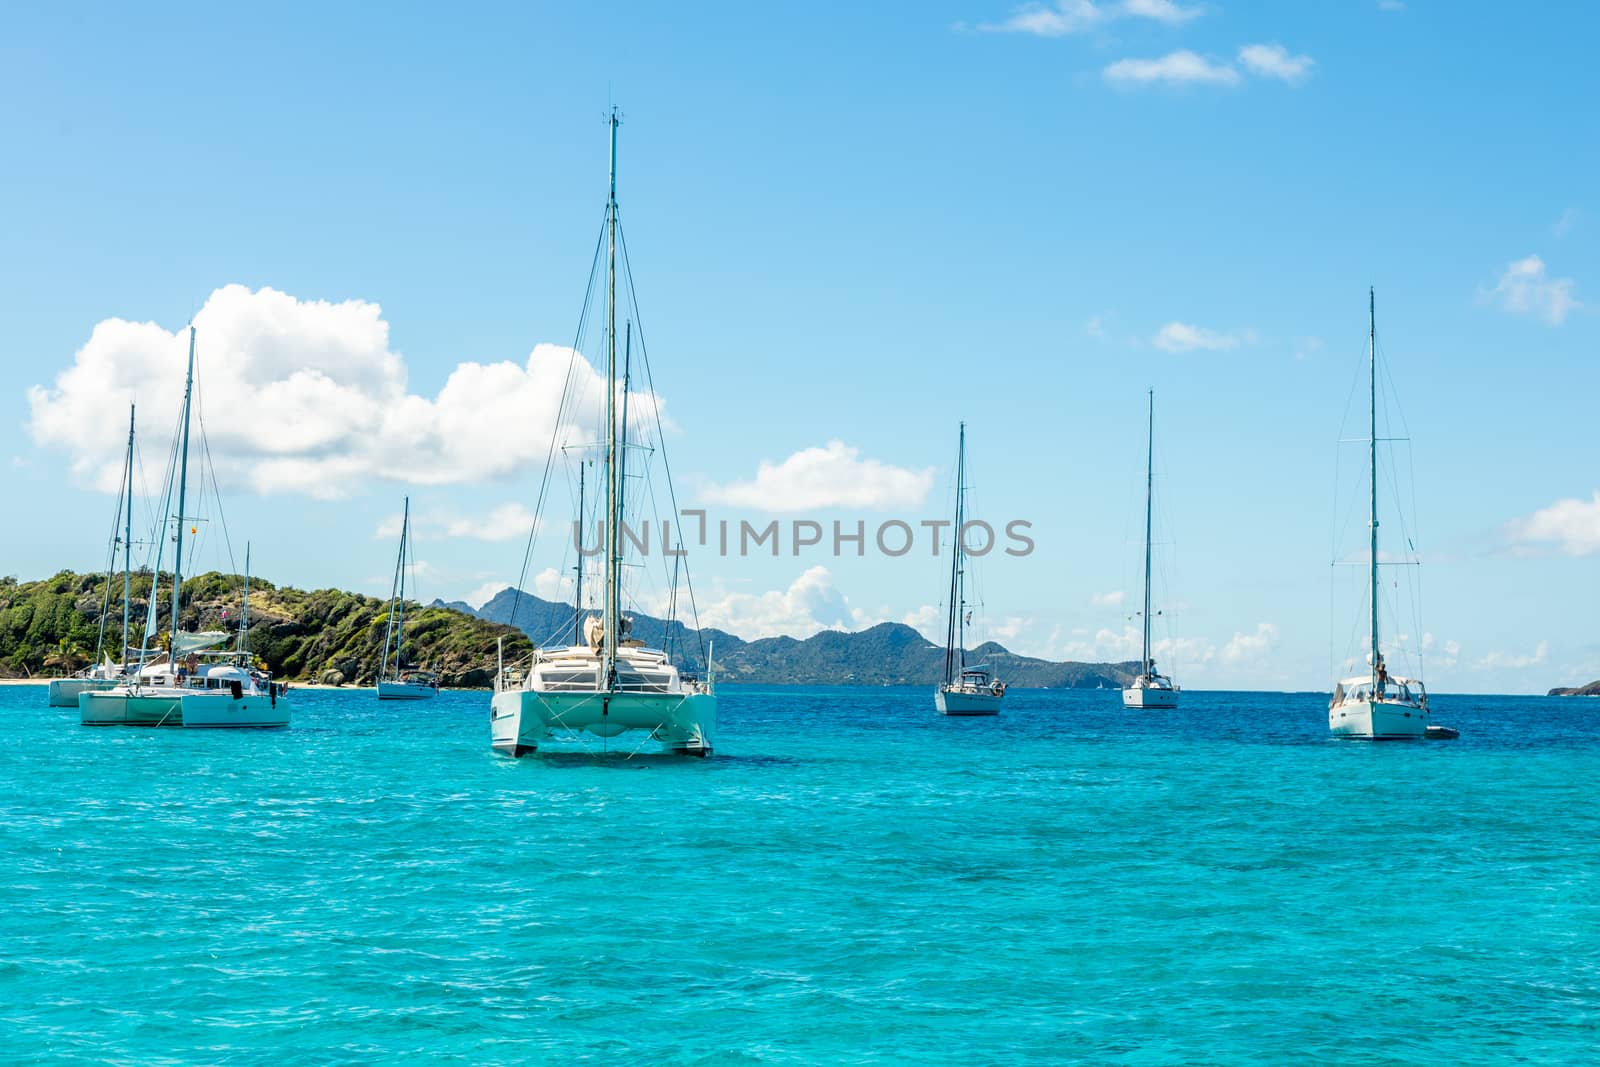 Turquoise colored sea with ancored yachts and catamarans, Tobago by ambeon